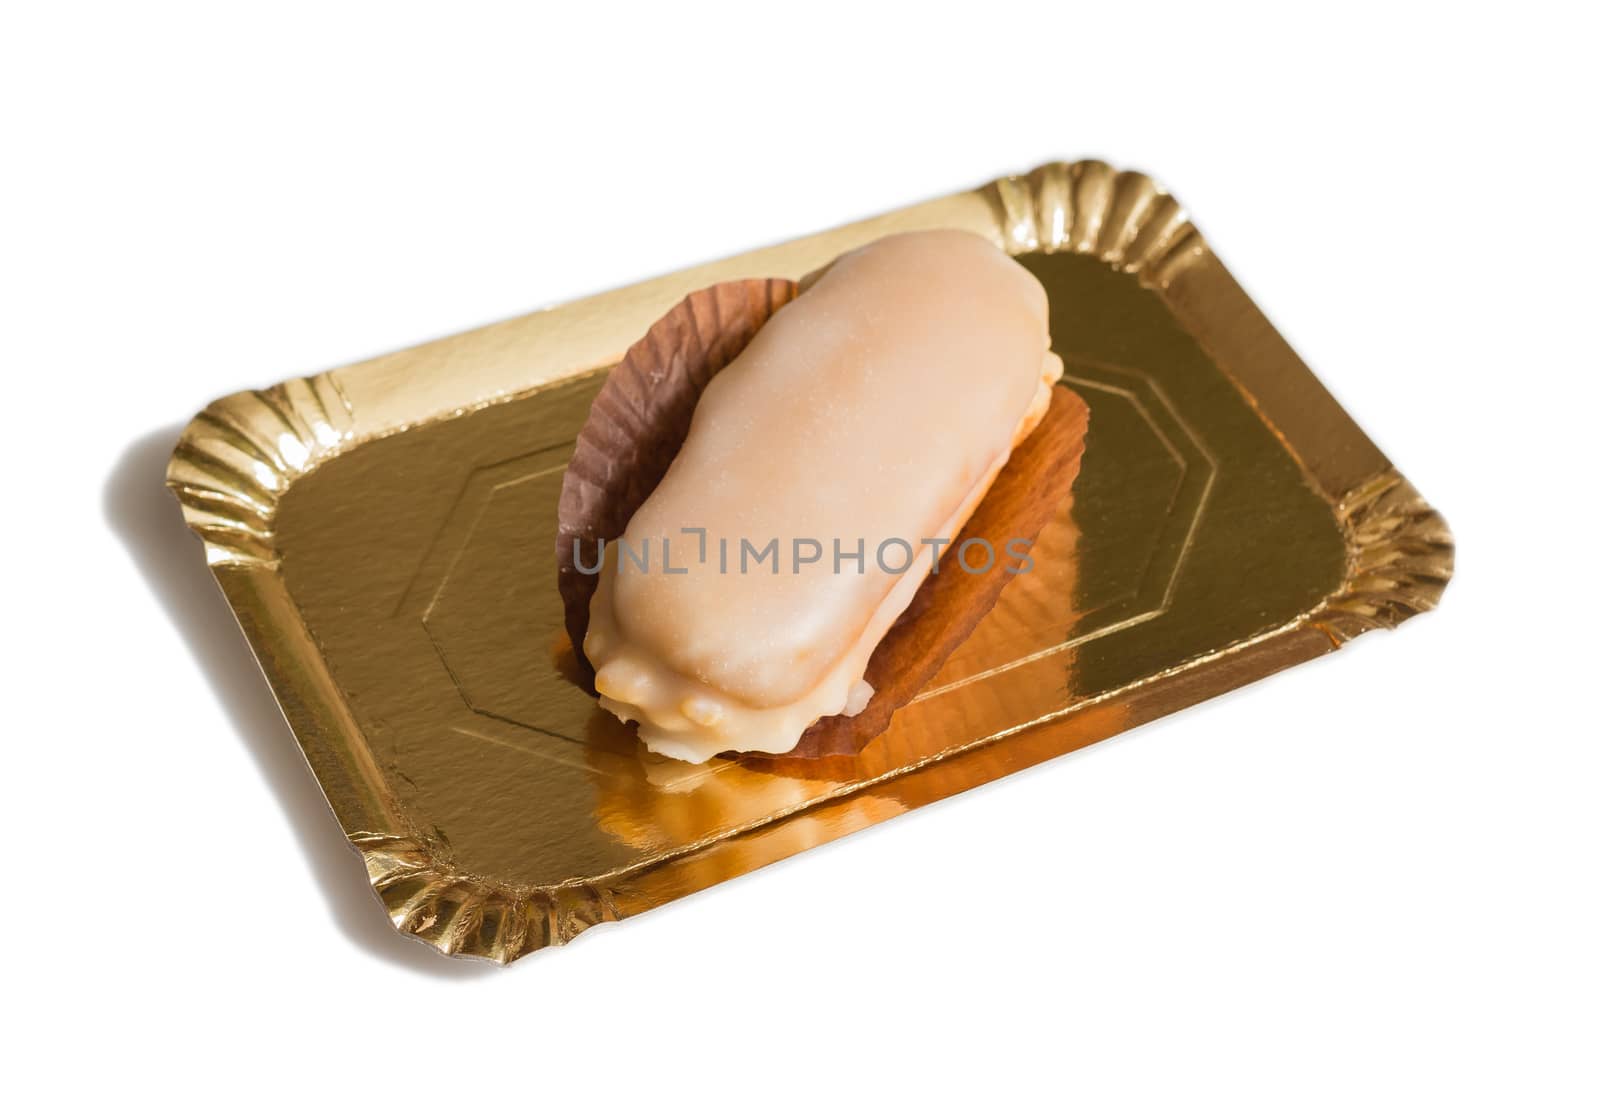 Delicious traditional asturian almond cake with sugar frosting and known as "carbayon", isolated on white background